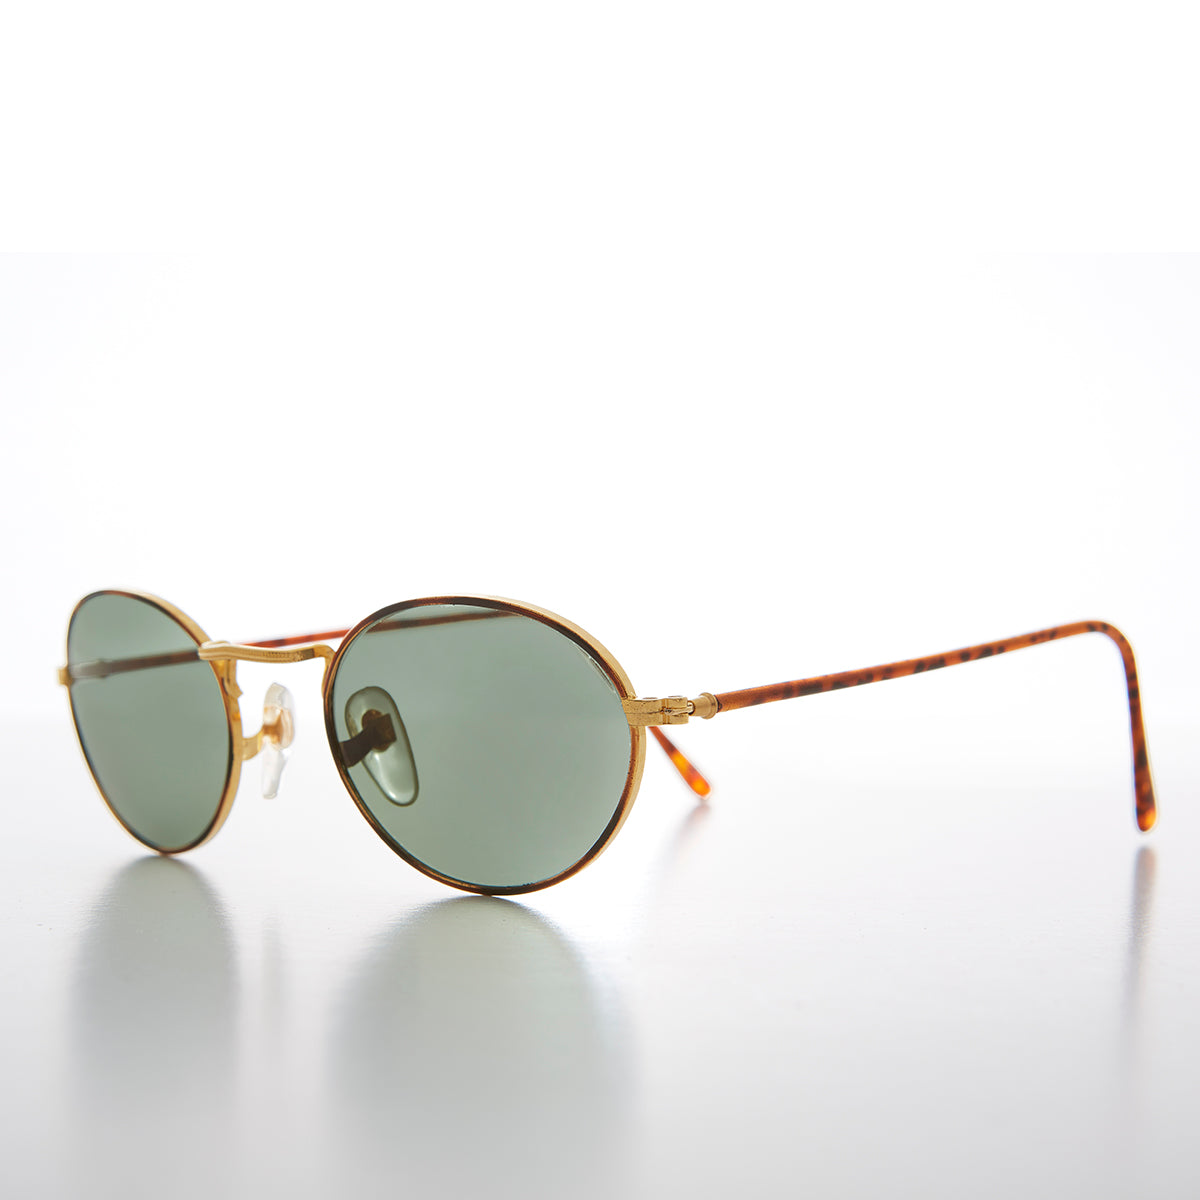 Gold and Tortoise Perfect Oval Sunglass